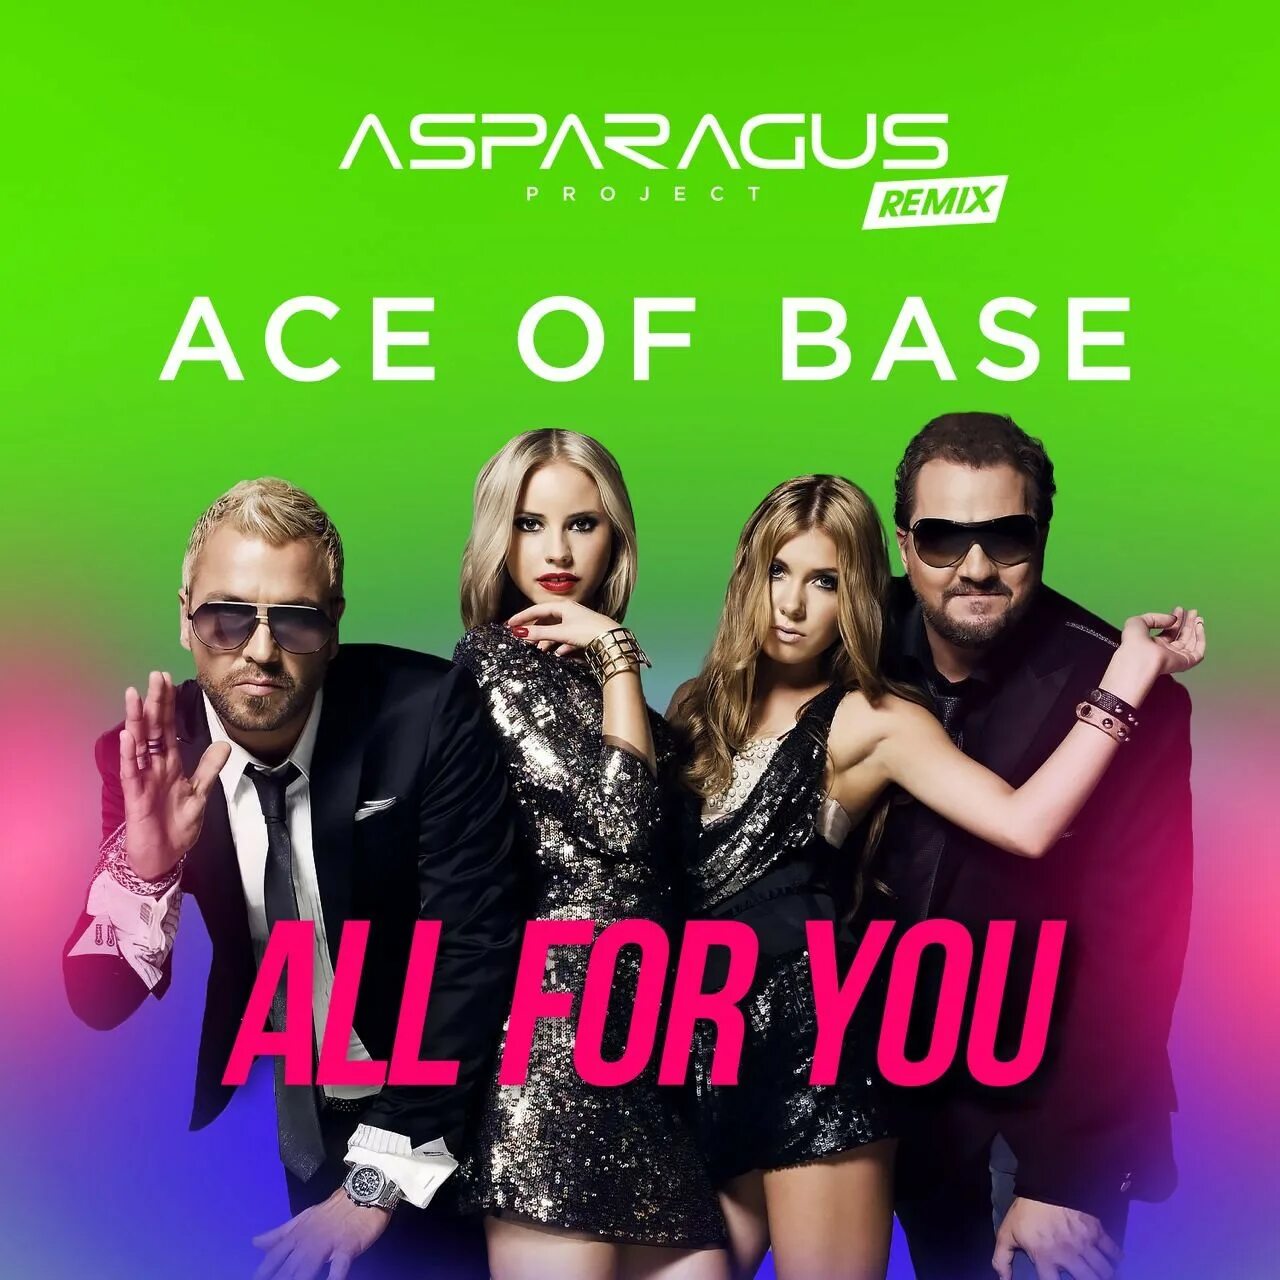 Mandee feat ace of base. Группа Ace of Base 2020. Ace of Base сейчас 2021. Ace of Base сейчас 2019. Ace of Base all for you.